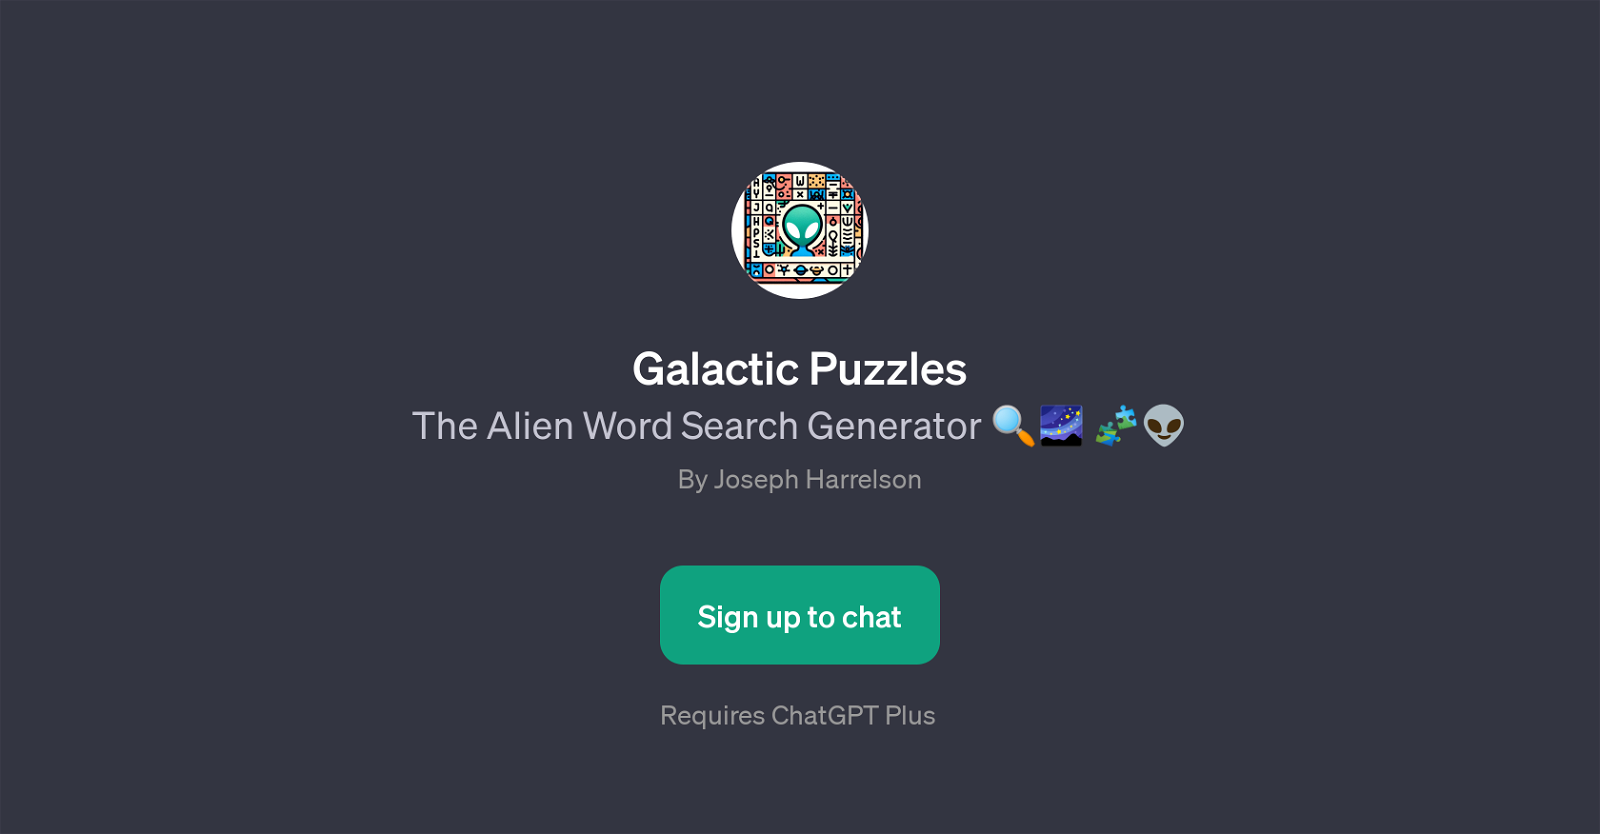 Galactic Puzzles website